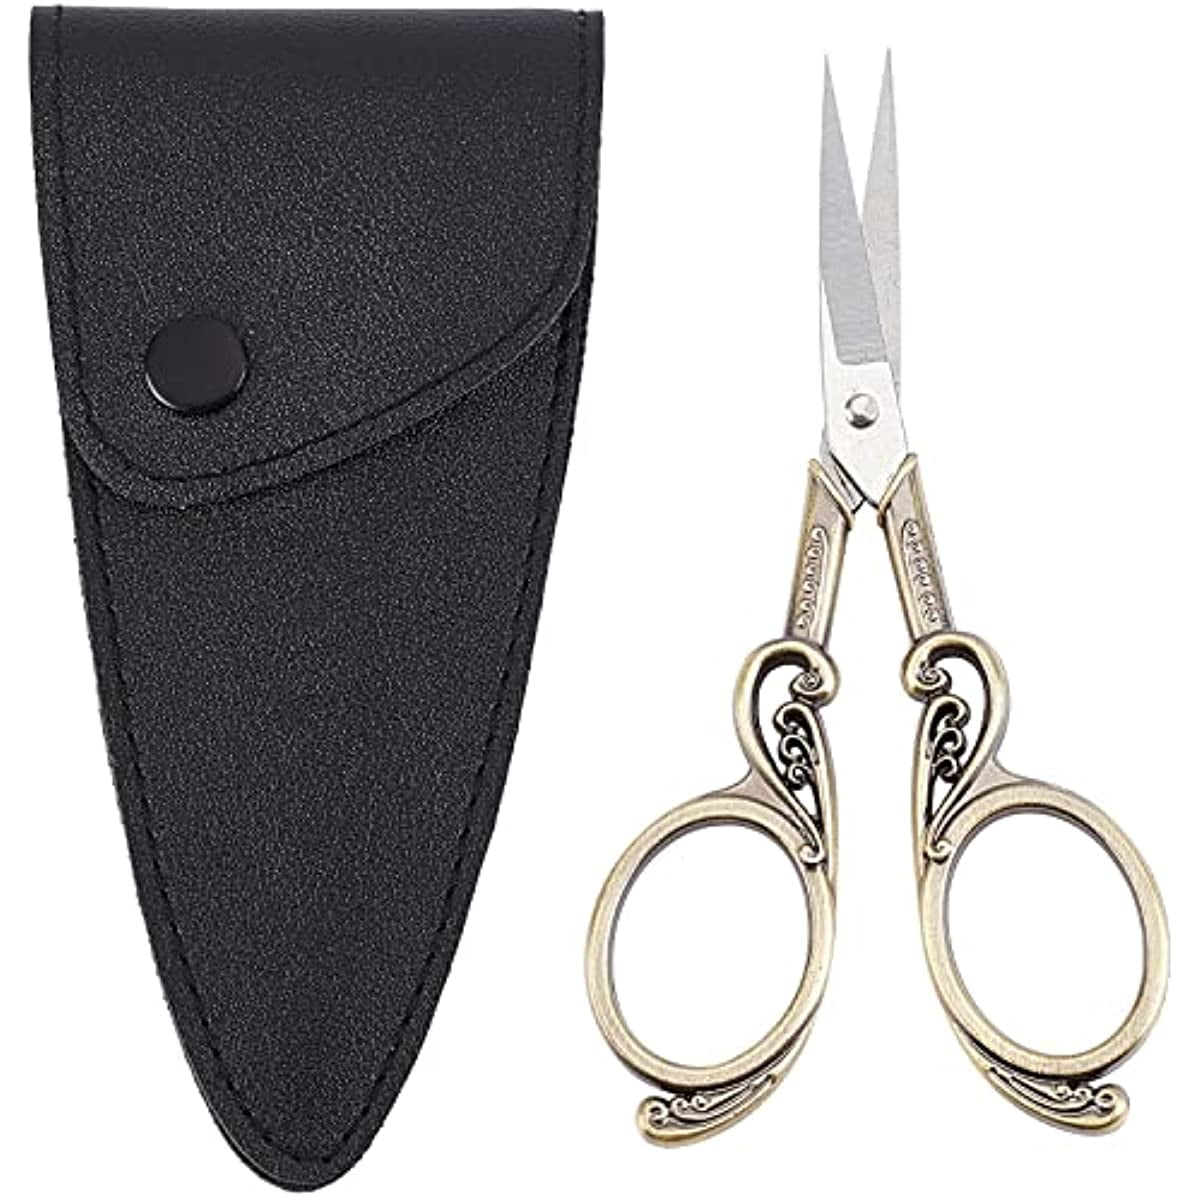 Protective Sleeve Embroidery Yarn Scissors Small Thread Sewing, U-Shaped  Yarn Cut with Cover Cross Stitch Small Scissors Line Cut